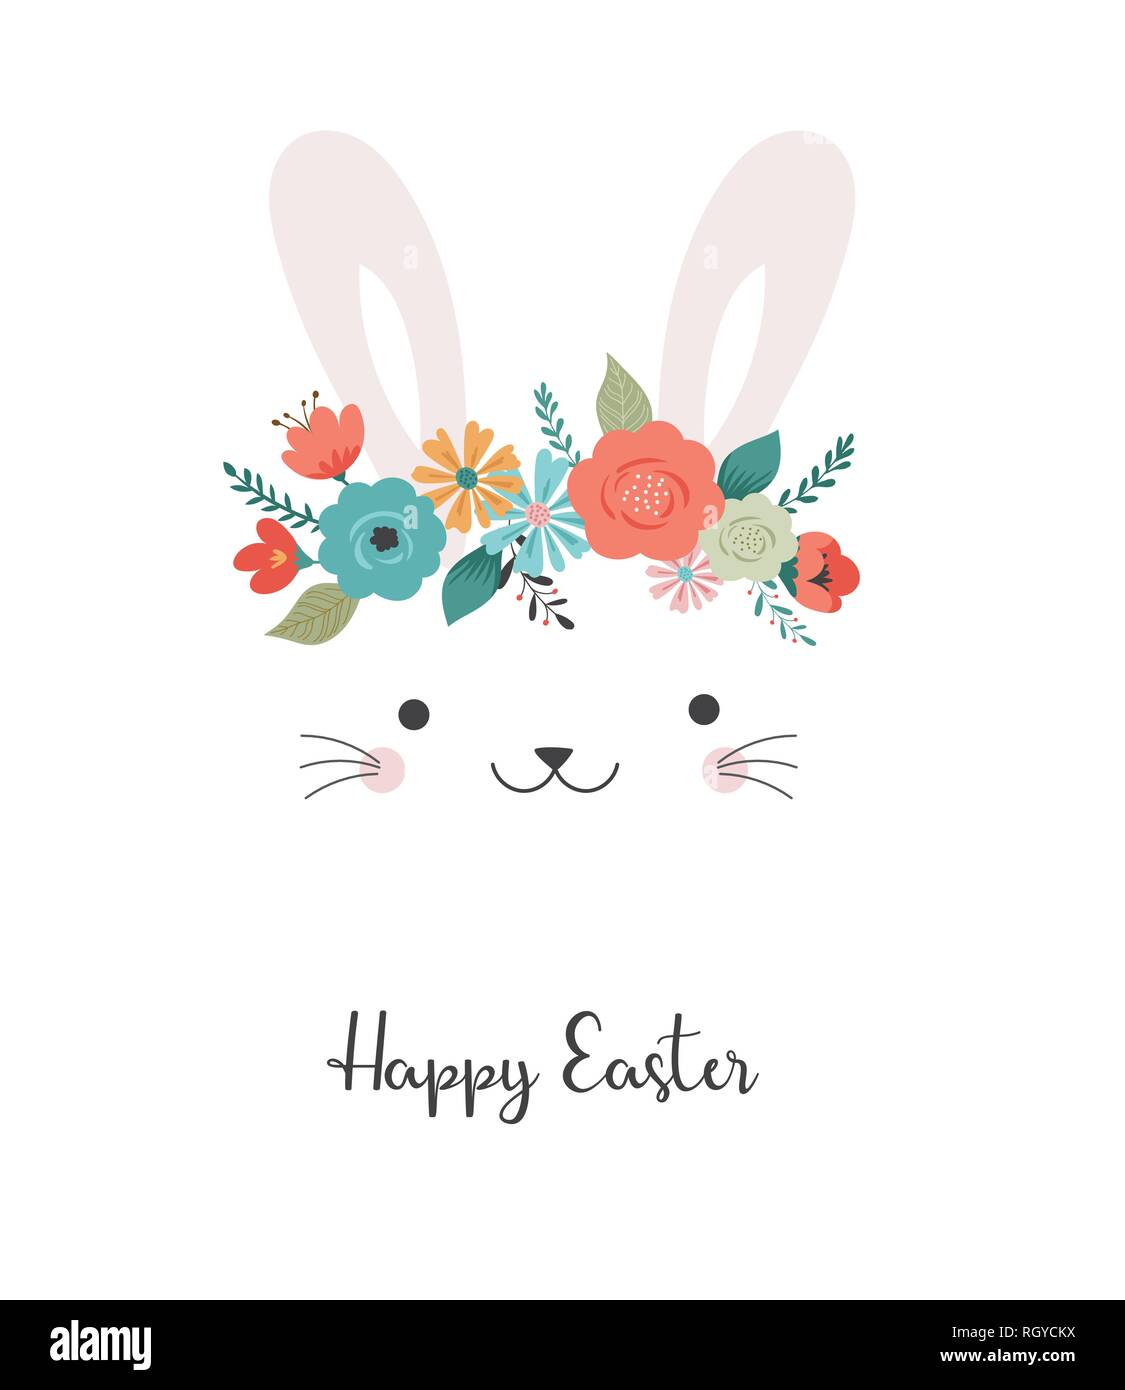 Happy Easter card - cute bunny with flower crown, vector illustration Stock Vector